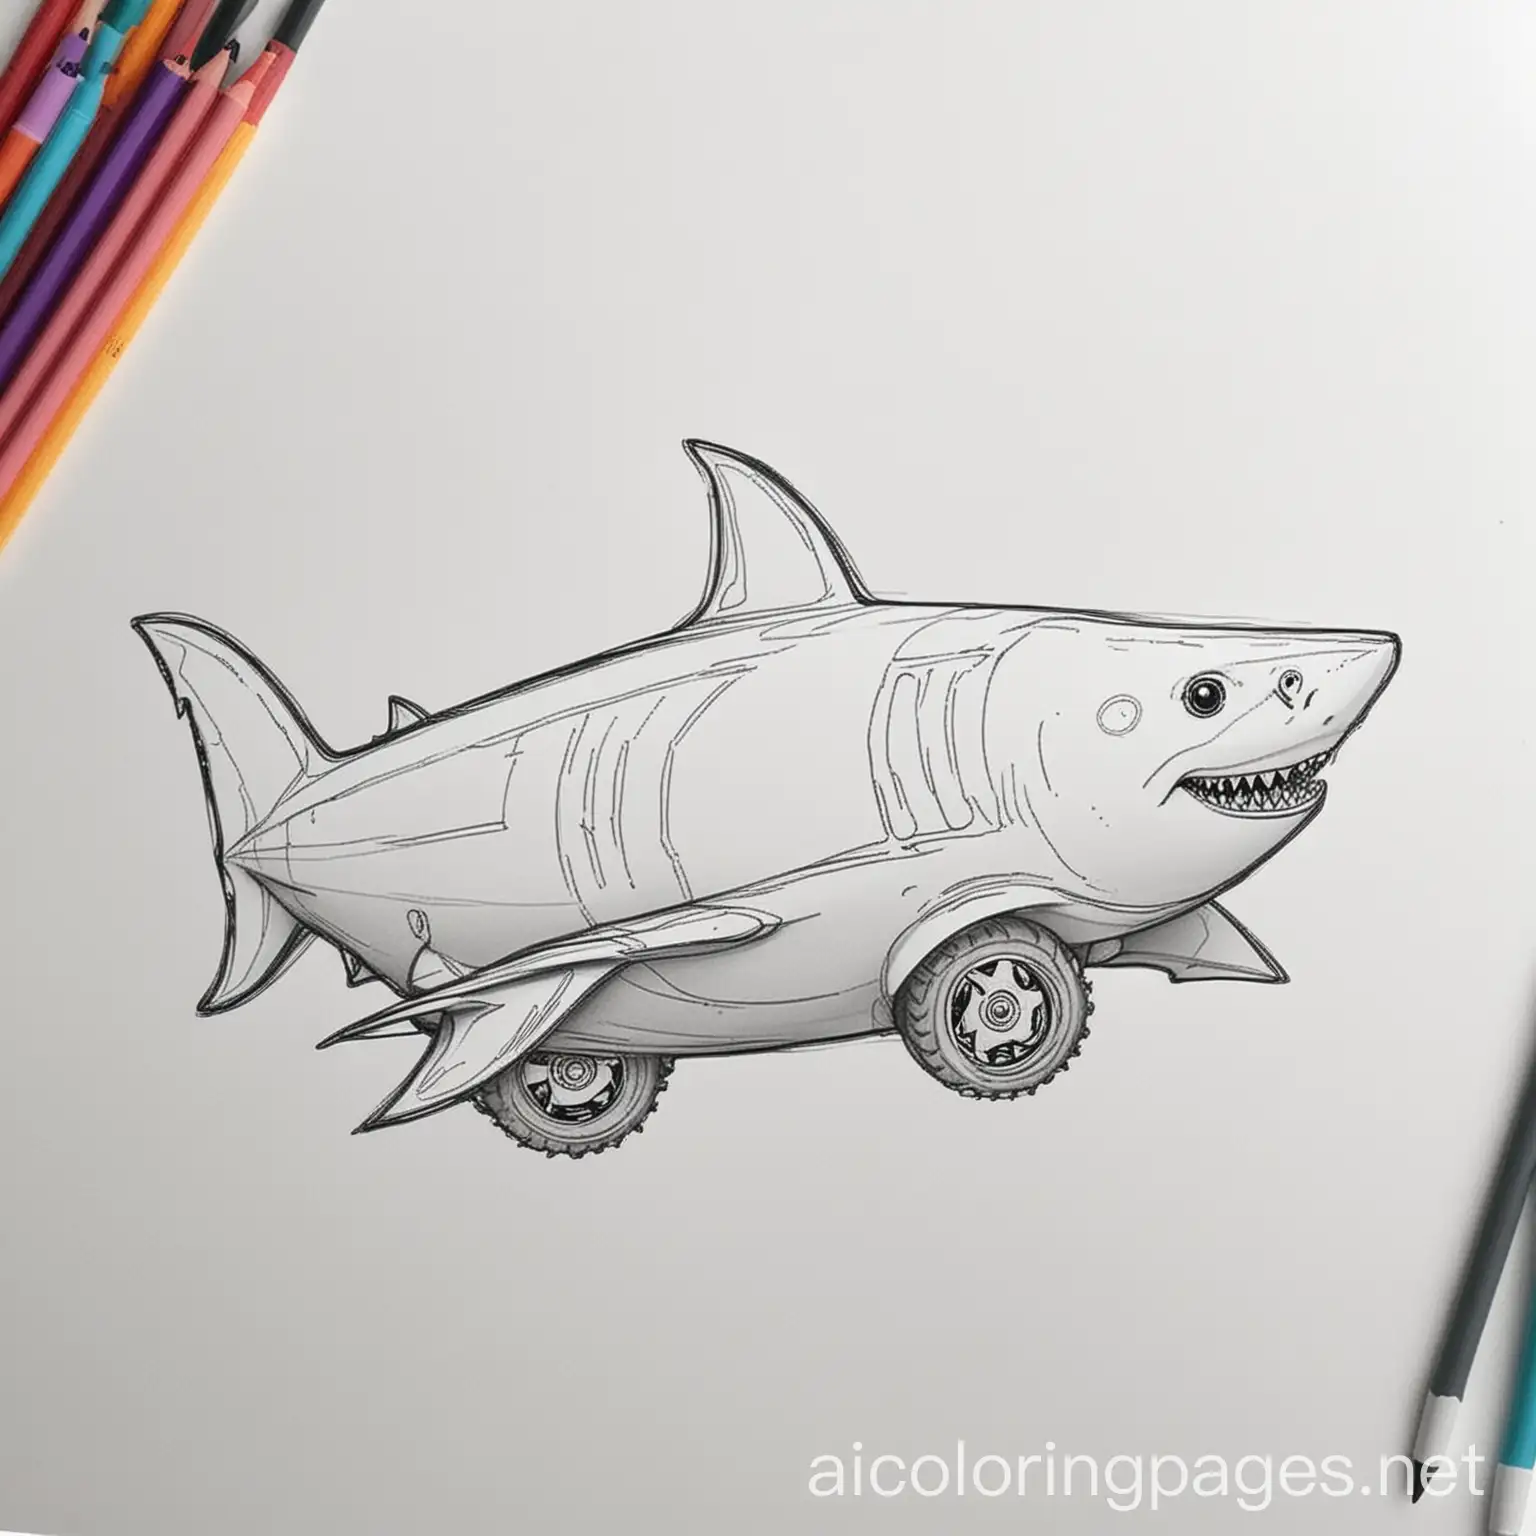 shark shaped car, Coloring Page, black and white, line art, white background, Simplicity, Ample White Space. The background of the coloring page is plain white to make it easy for young children to color within the lines. The outlines of all the subjects are easy to distinguish, making it simple for kids to color without too much difficulty